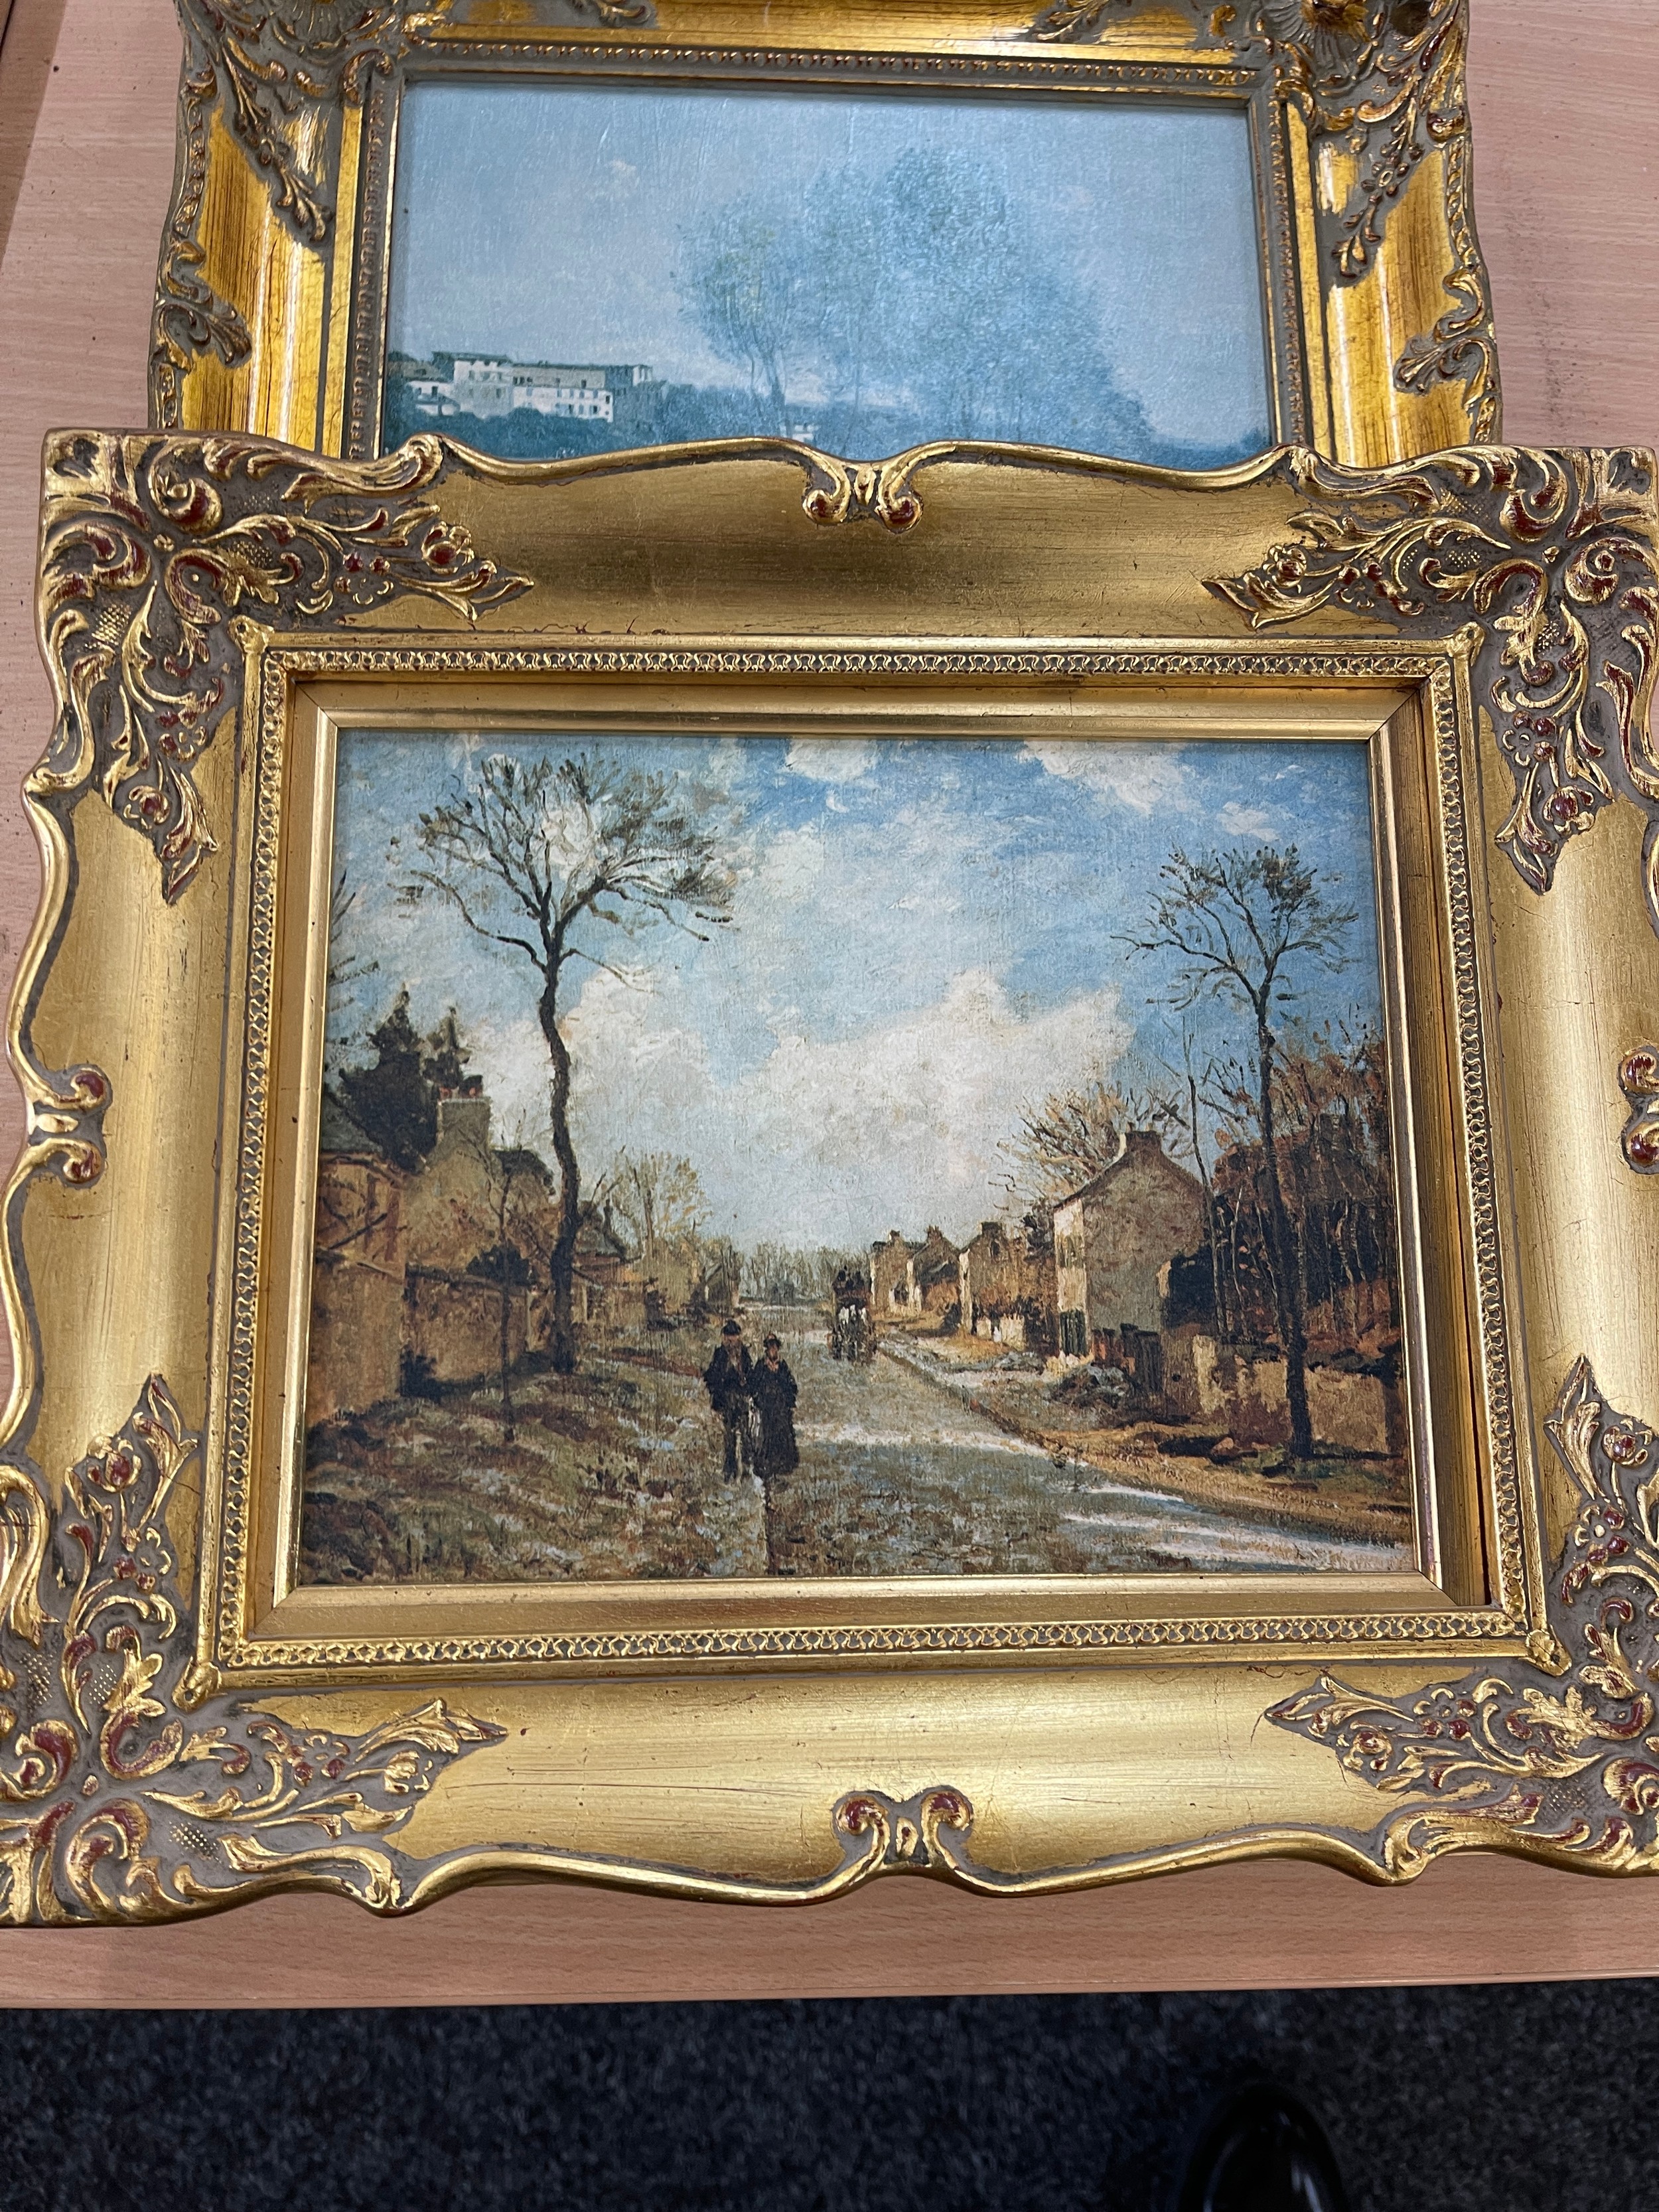 3 Gilt framed prints largest measures approximately 12 inches tall 14 inches wide - Image 2 of 3